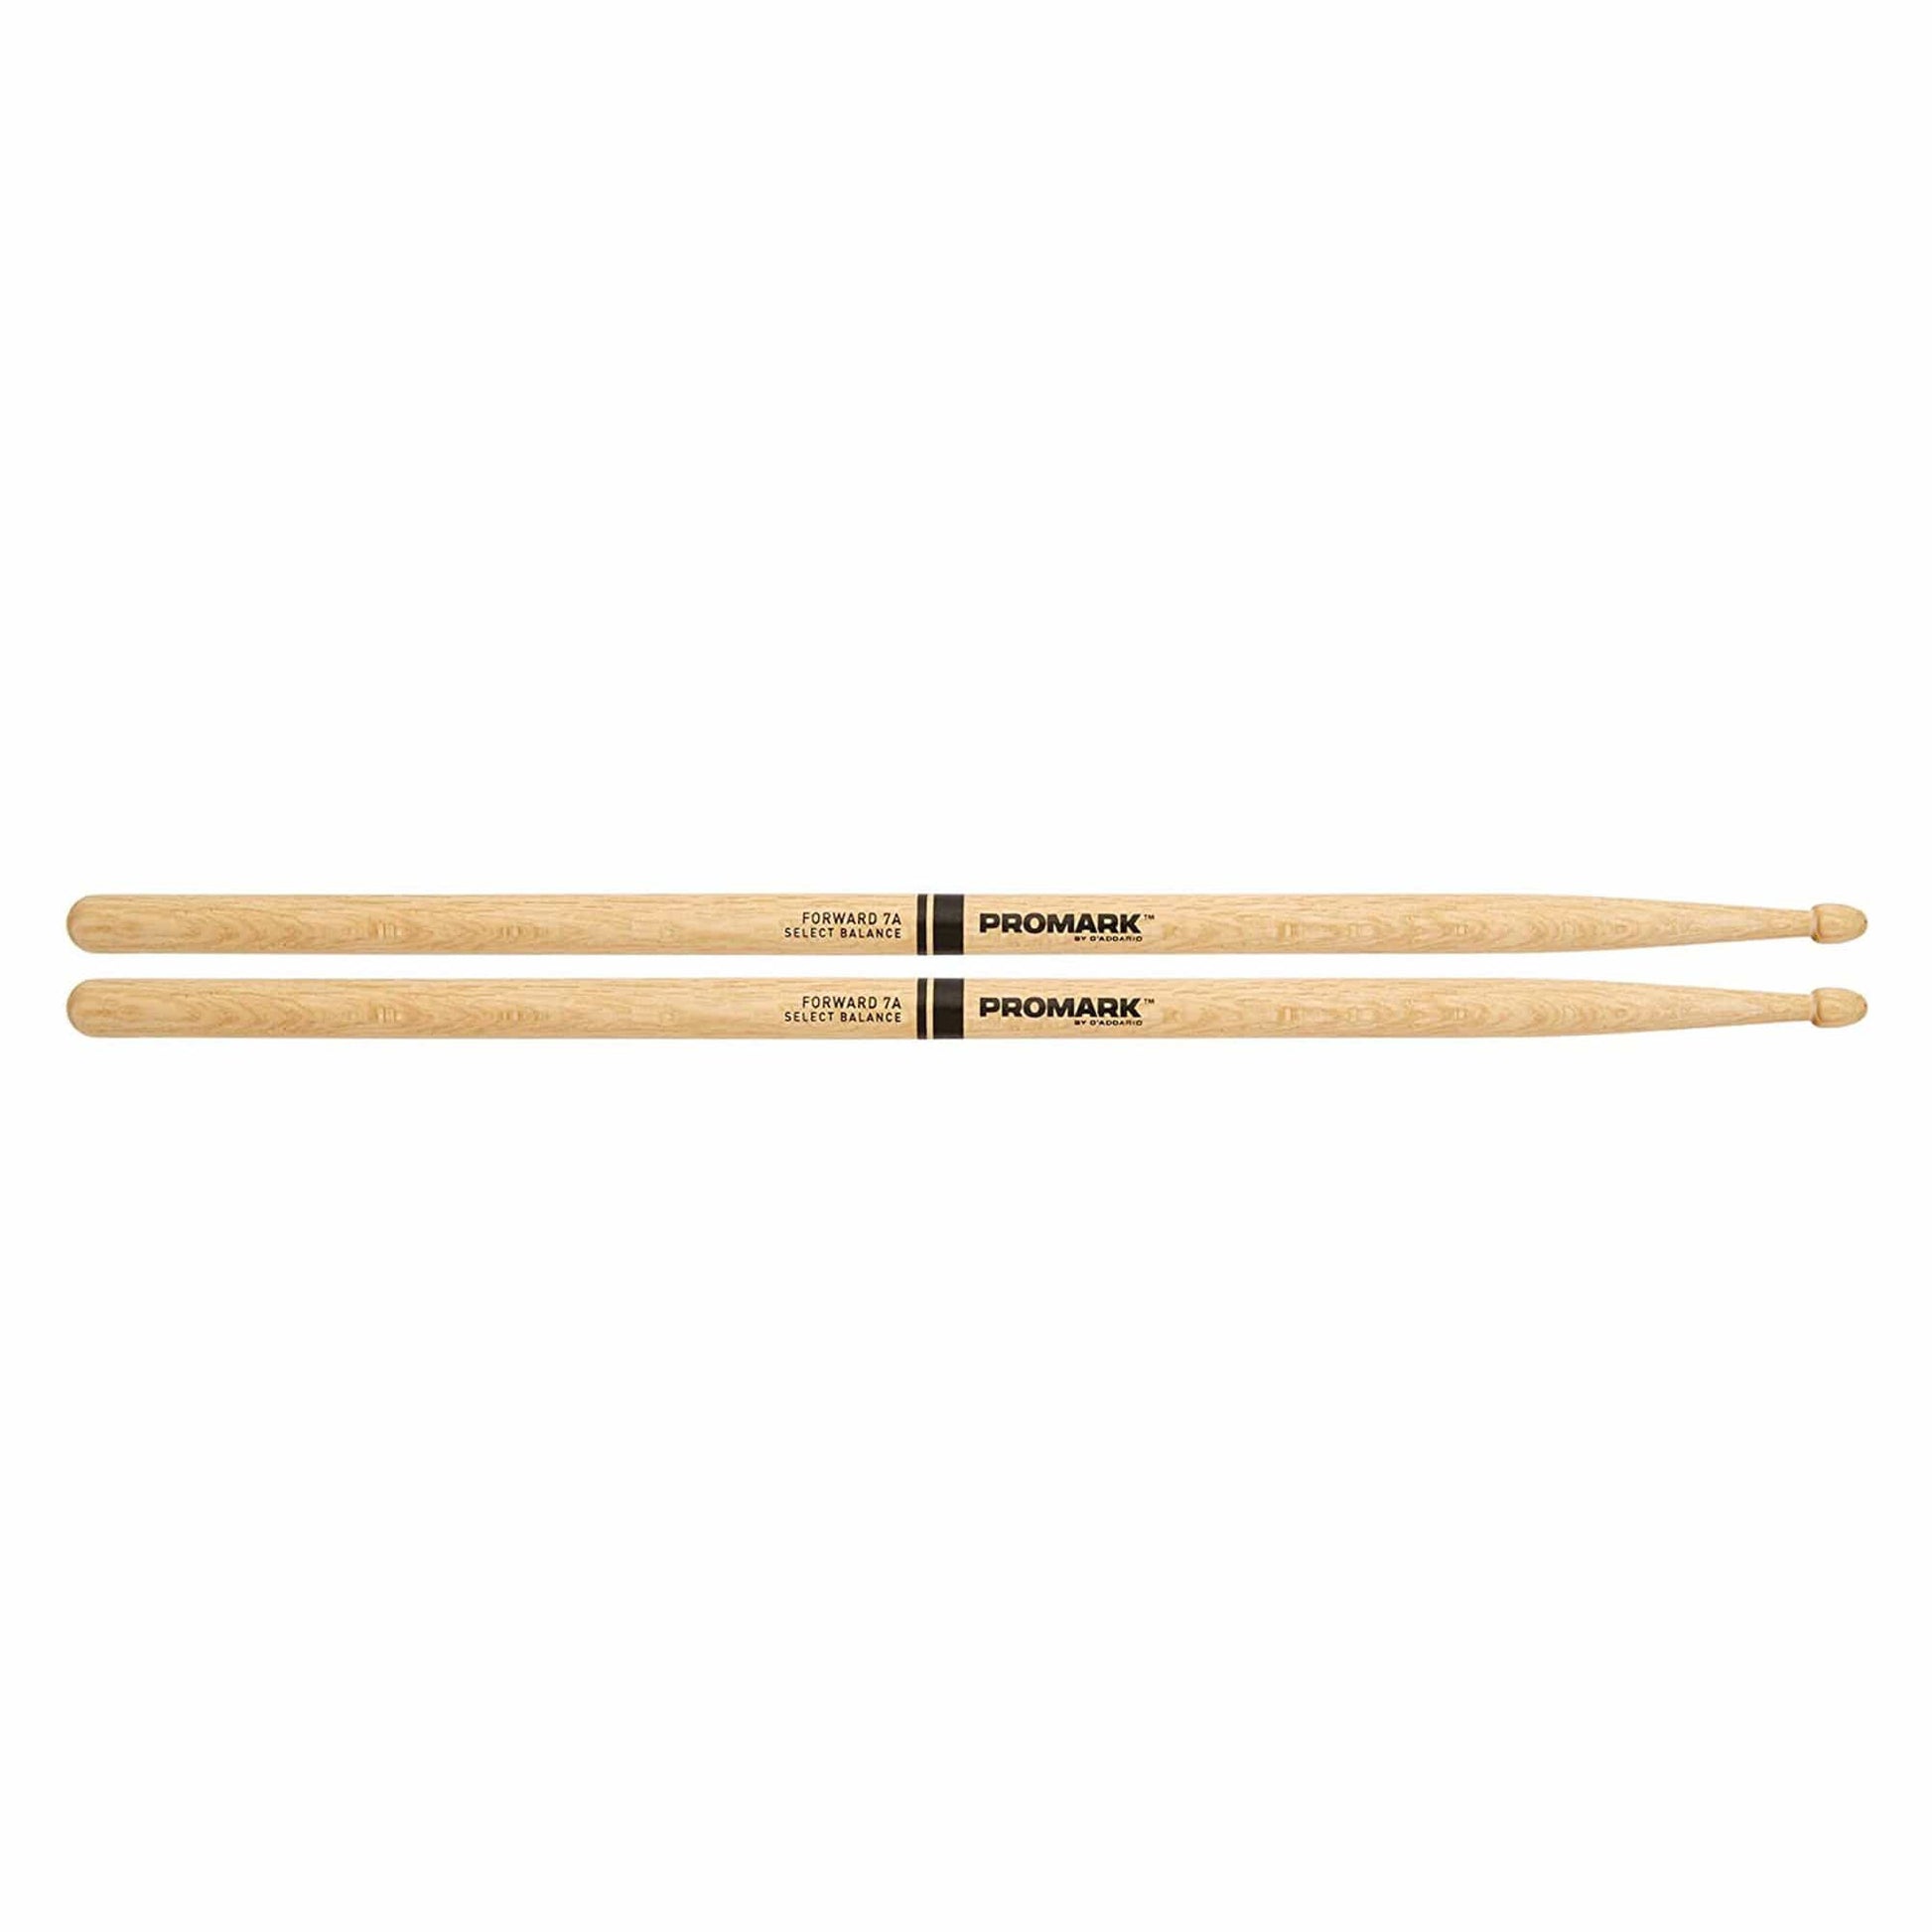 Promark Forward 7A Shira Kashi Oak Wood Tip Drum Sticks Drums and Percussion / Parts and Accessories / Drum Sticks and Mallets